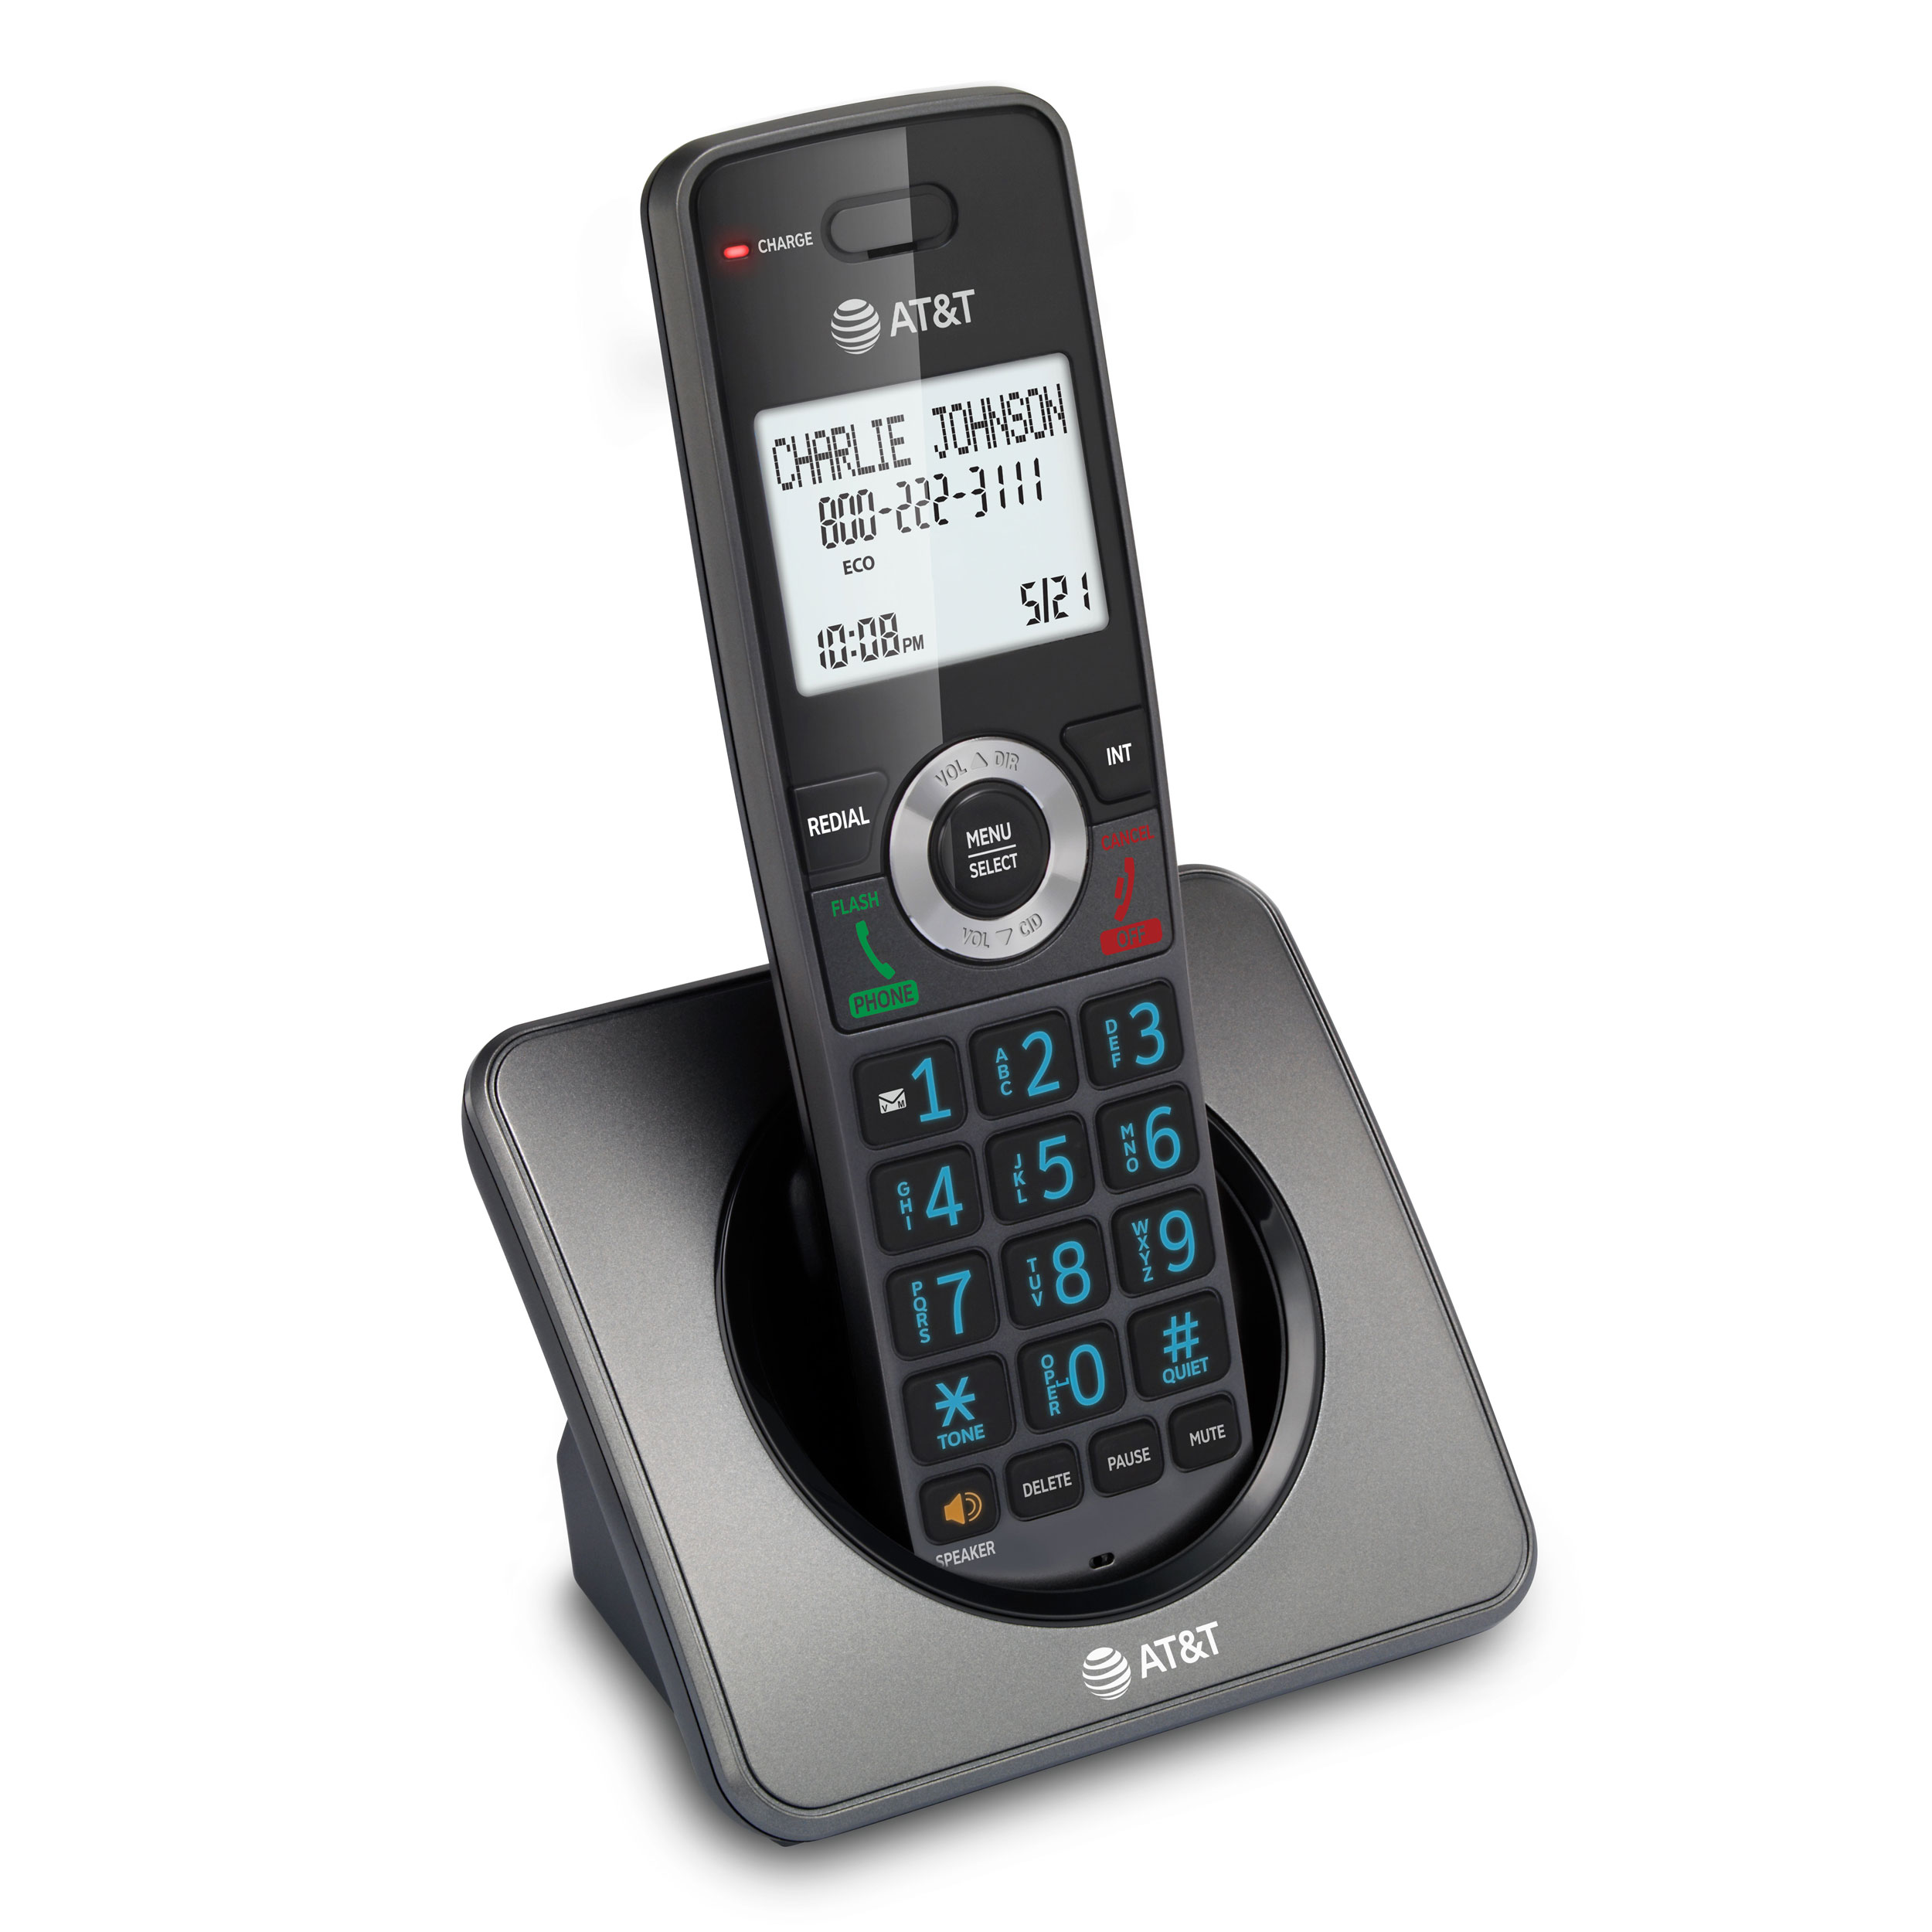 Cordless Home Phone with Call Block (Graphite & Black) - view 4